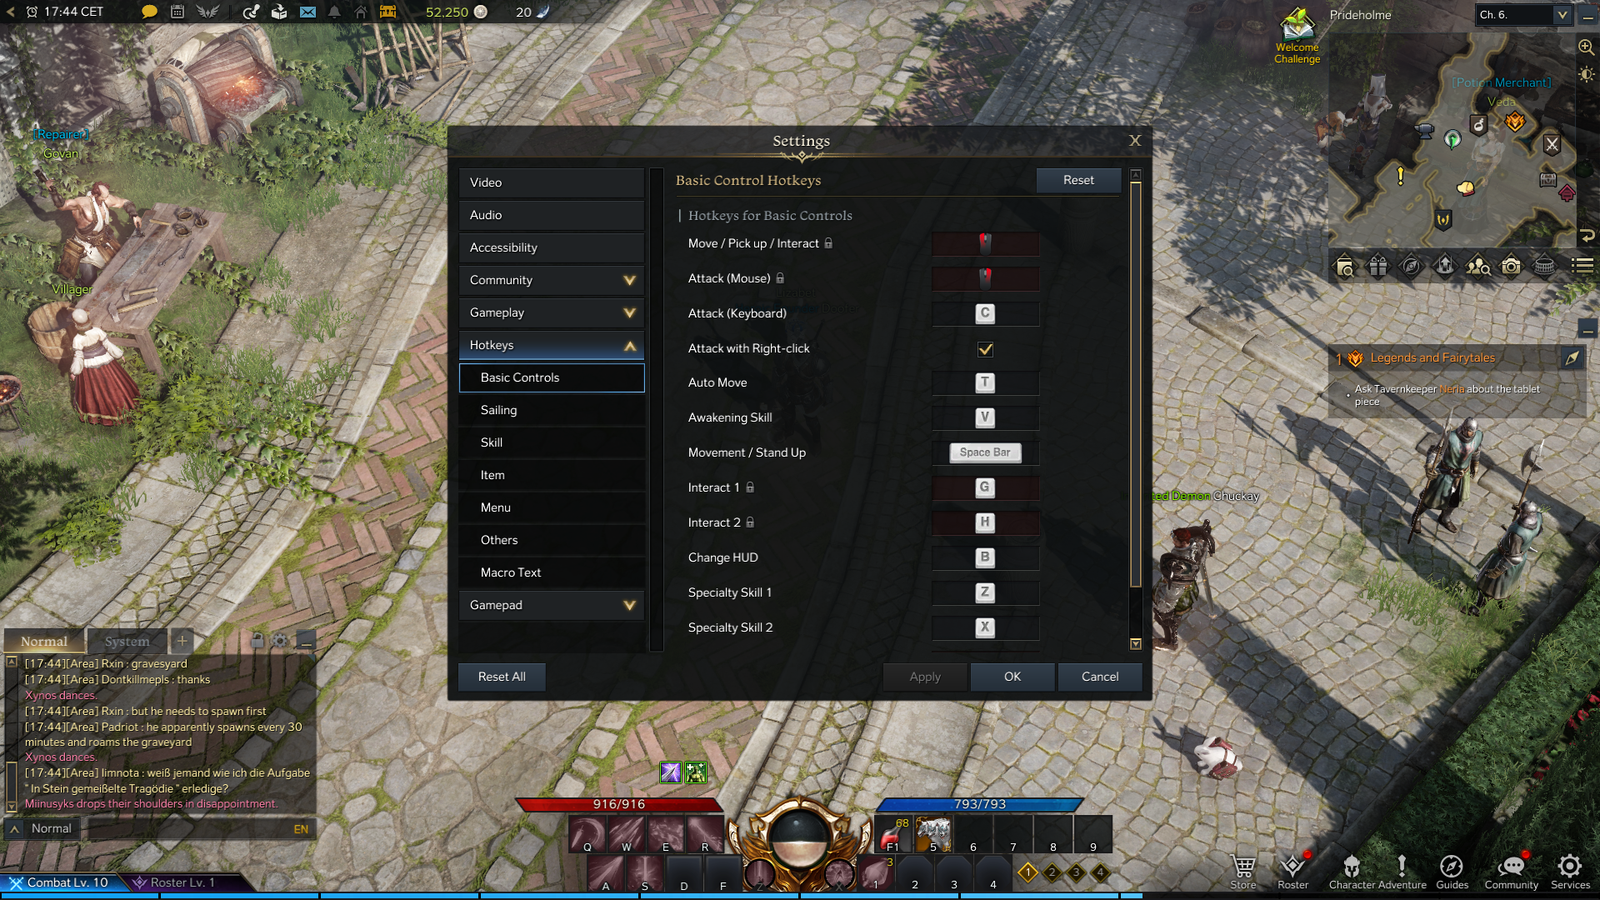 The Basic Controls hotkeys menu under settings in Lost Ark, where players can adjust mouse controls and keybinds.